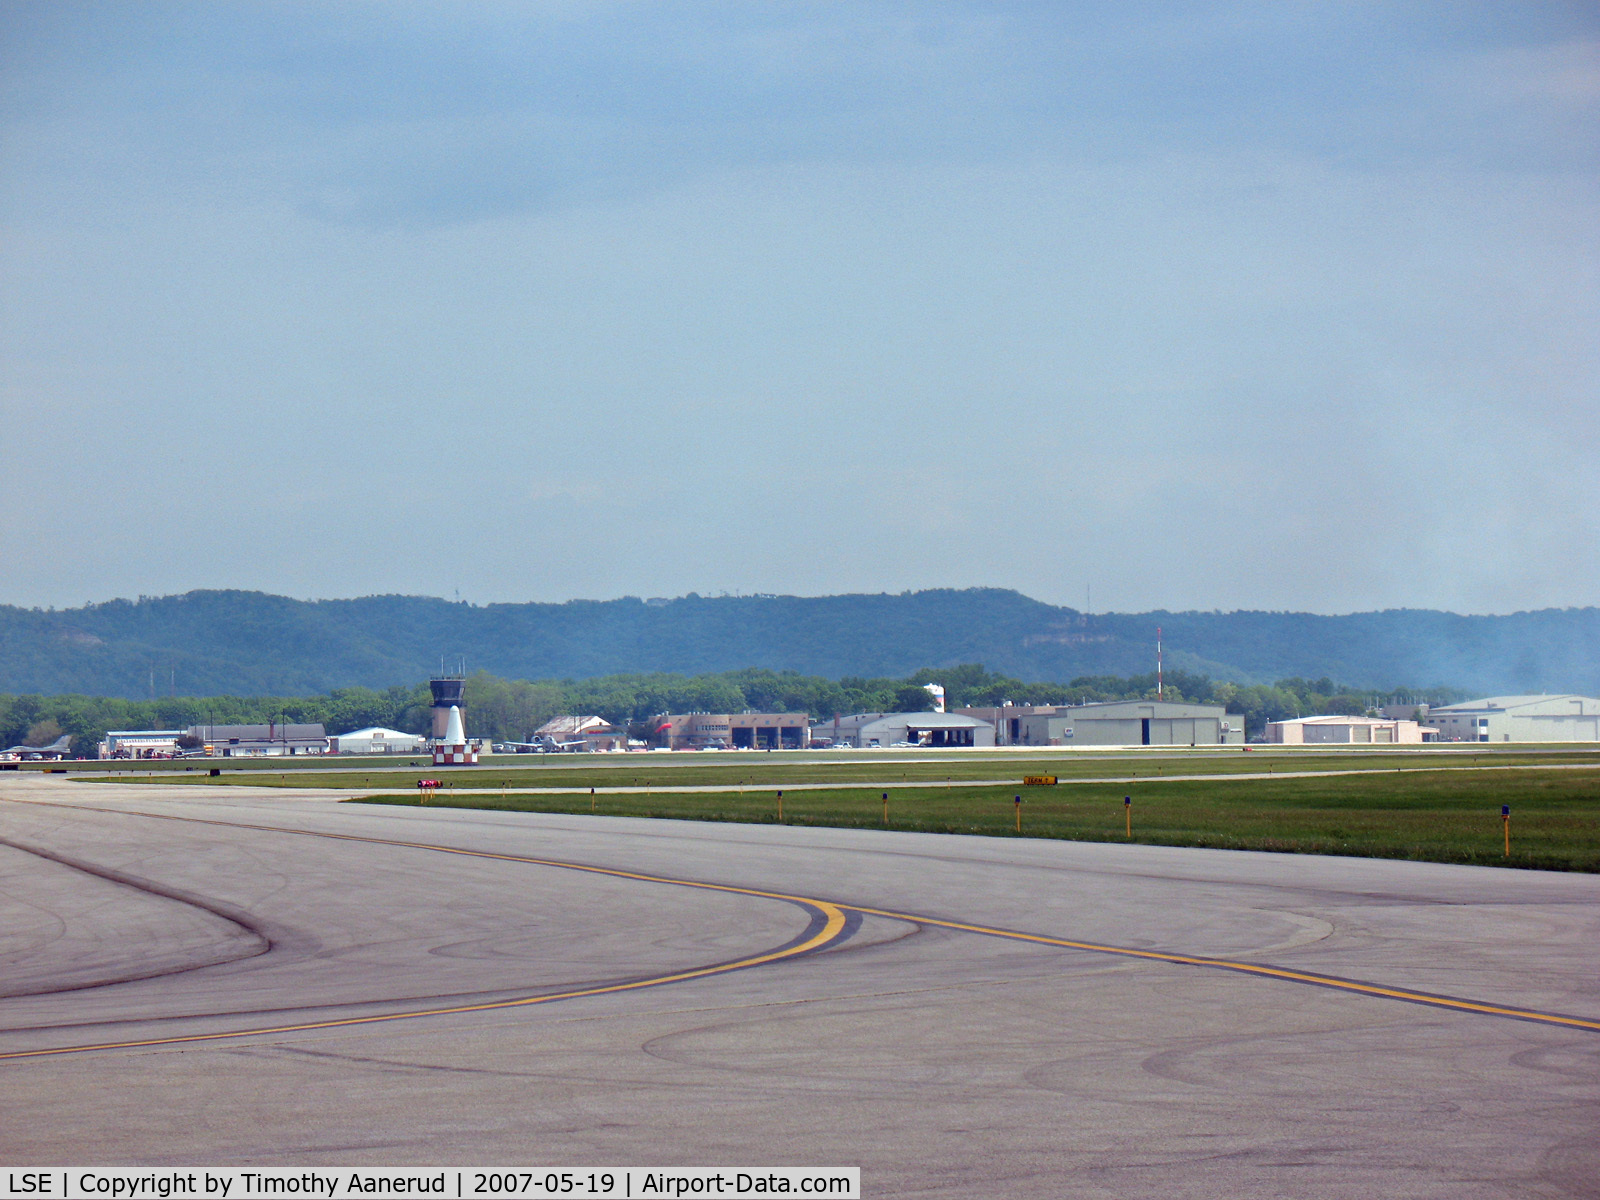 La Crosse Municipal Airport (LSE) - On the ground at LSE